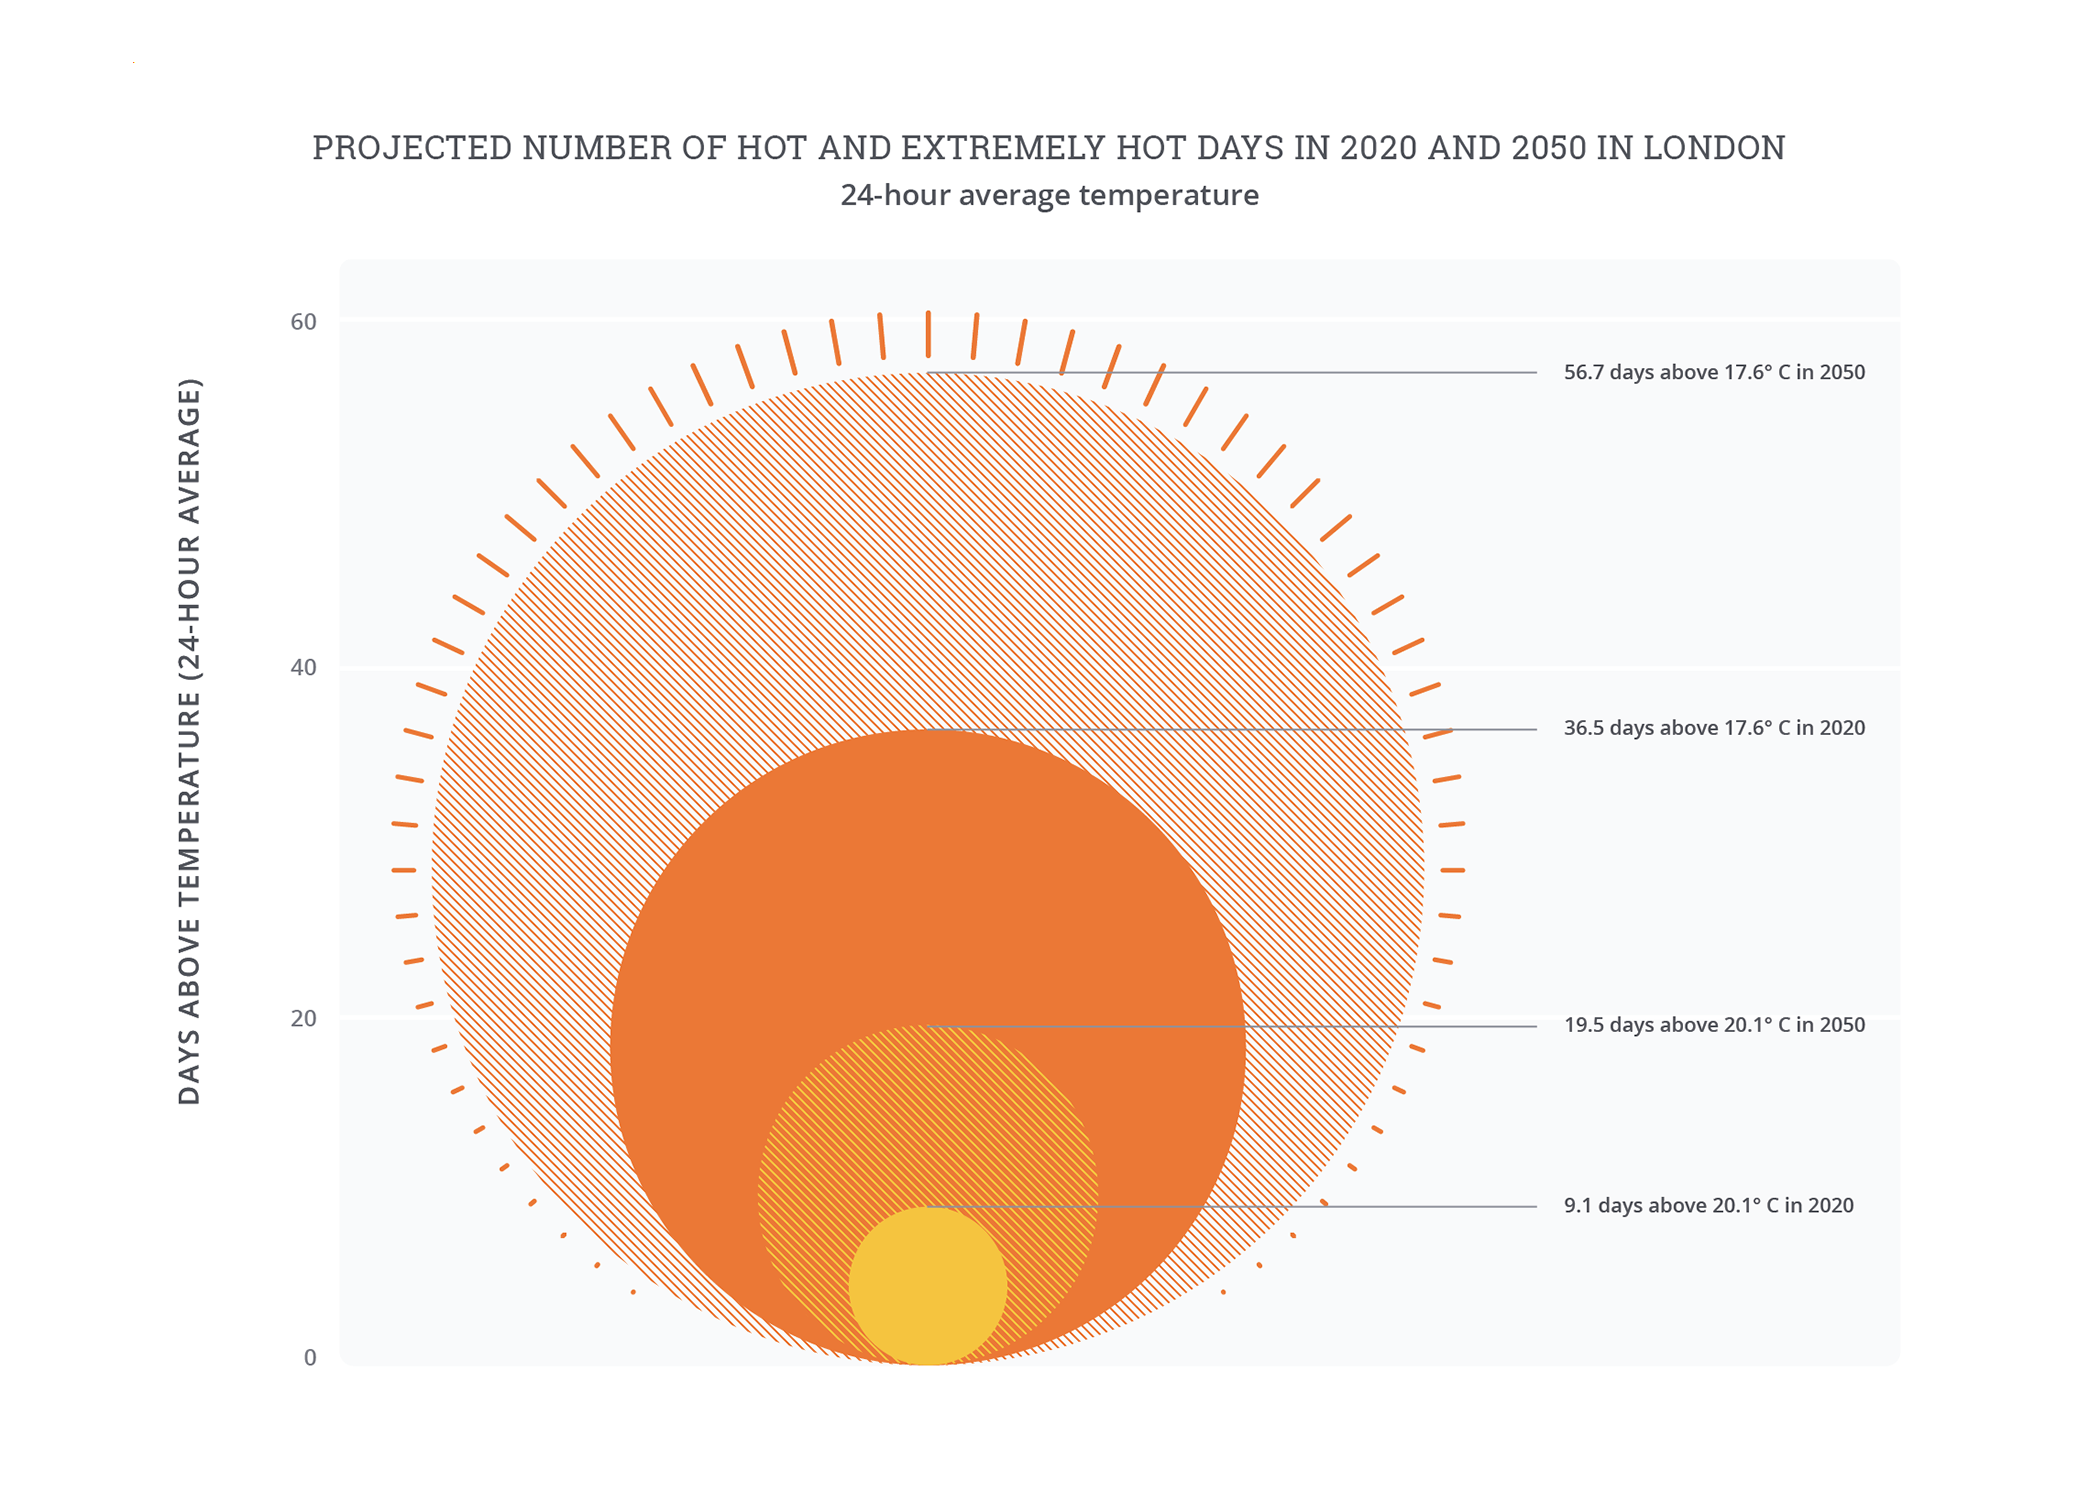 A concentric circle chart of the projected growth in number of hot andextremely hot days London experiences per year, between 2020 and2050, shows that we should expect that segment of the year which weconsider ‘hot/extremely hot’ to increase 6 fold by 2050.